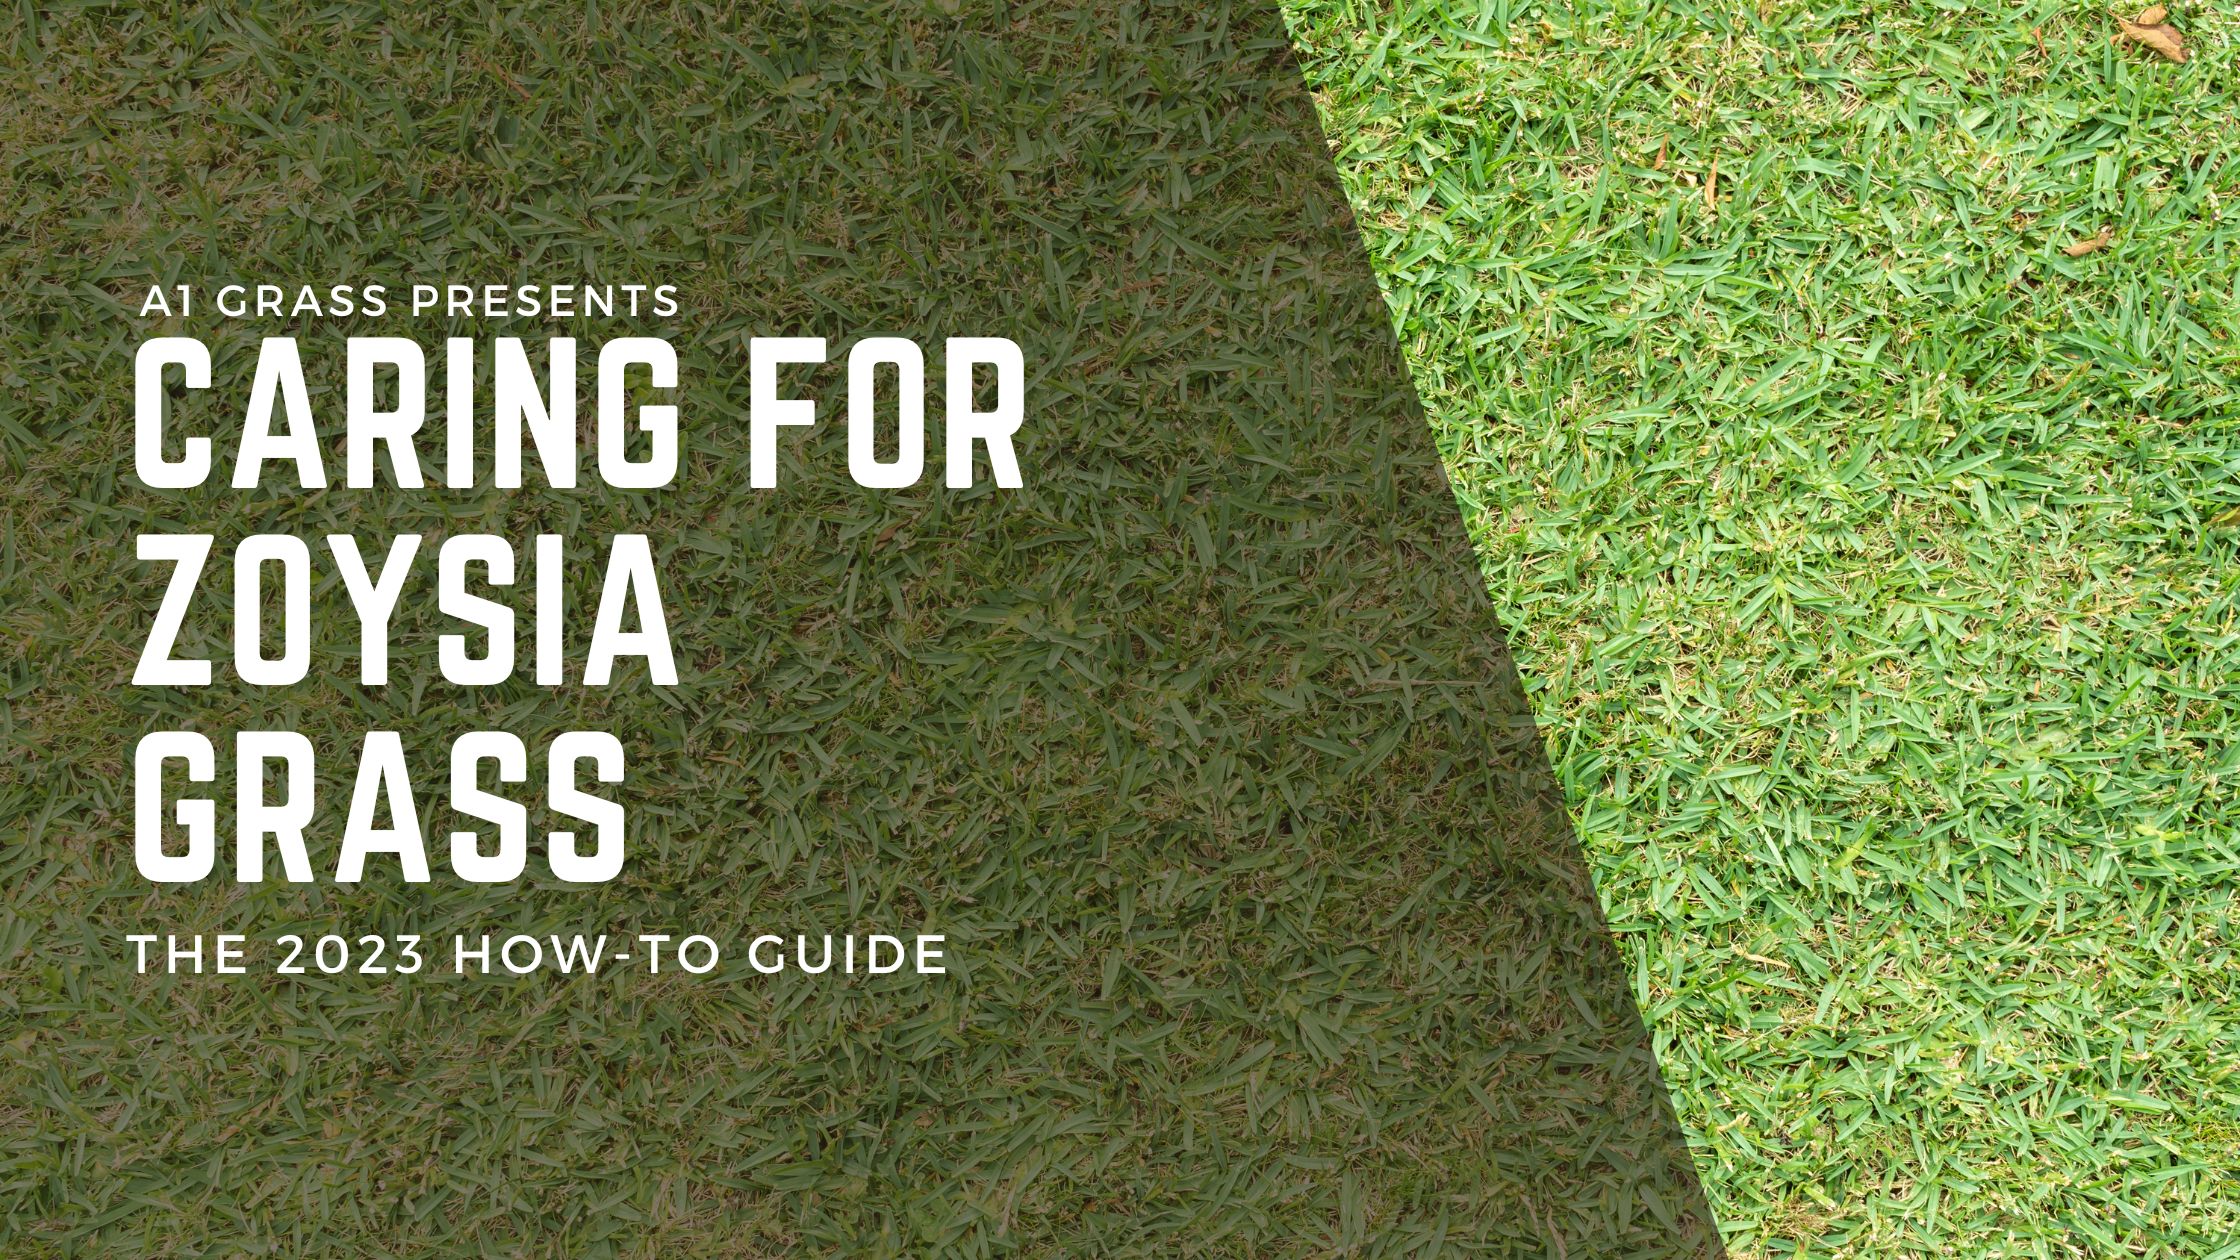 Caring for zoysia grass